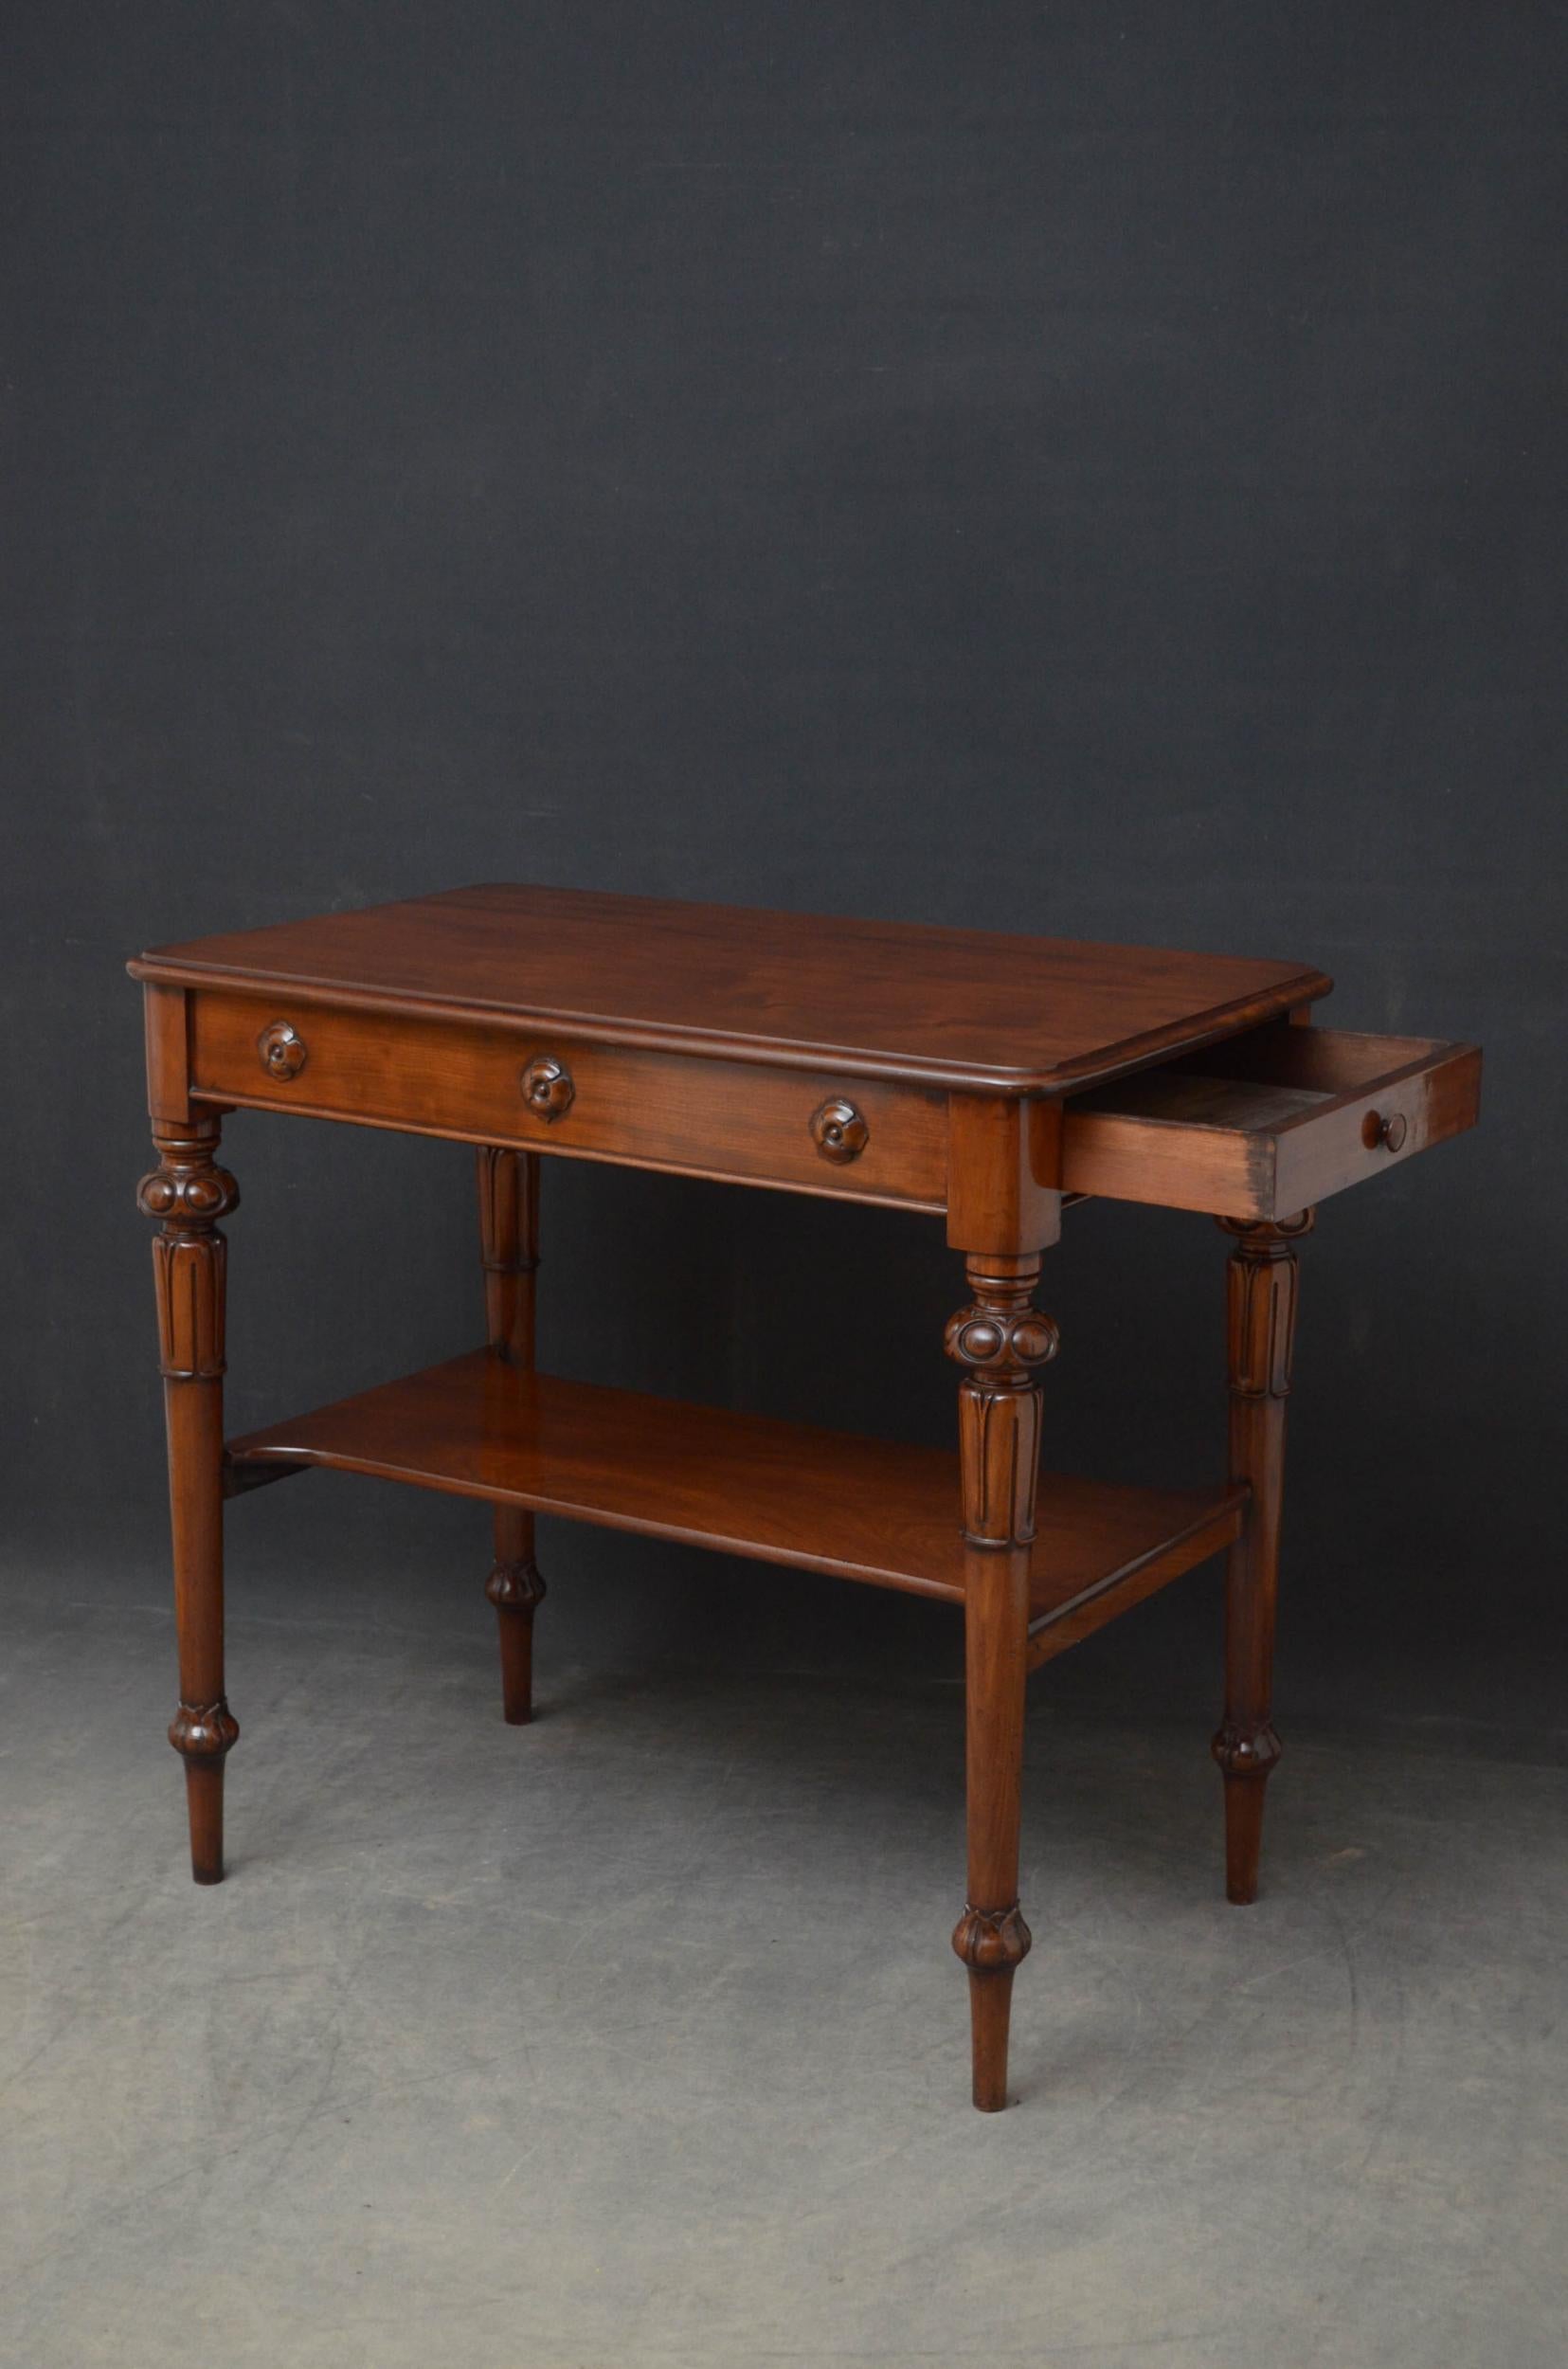 Sn5058, superb quality early Victorian side or console table in mahogany, having figured mahogany top with moulded edge above paterae decorated frieze enclosing a drawer with original turned handle, all standing on turned and tapered tulip carved